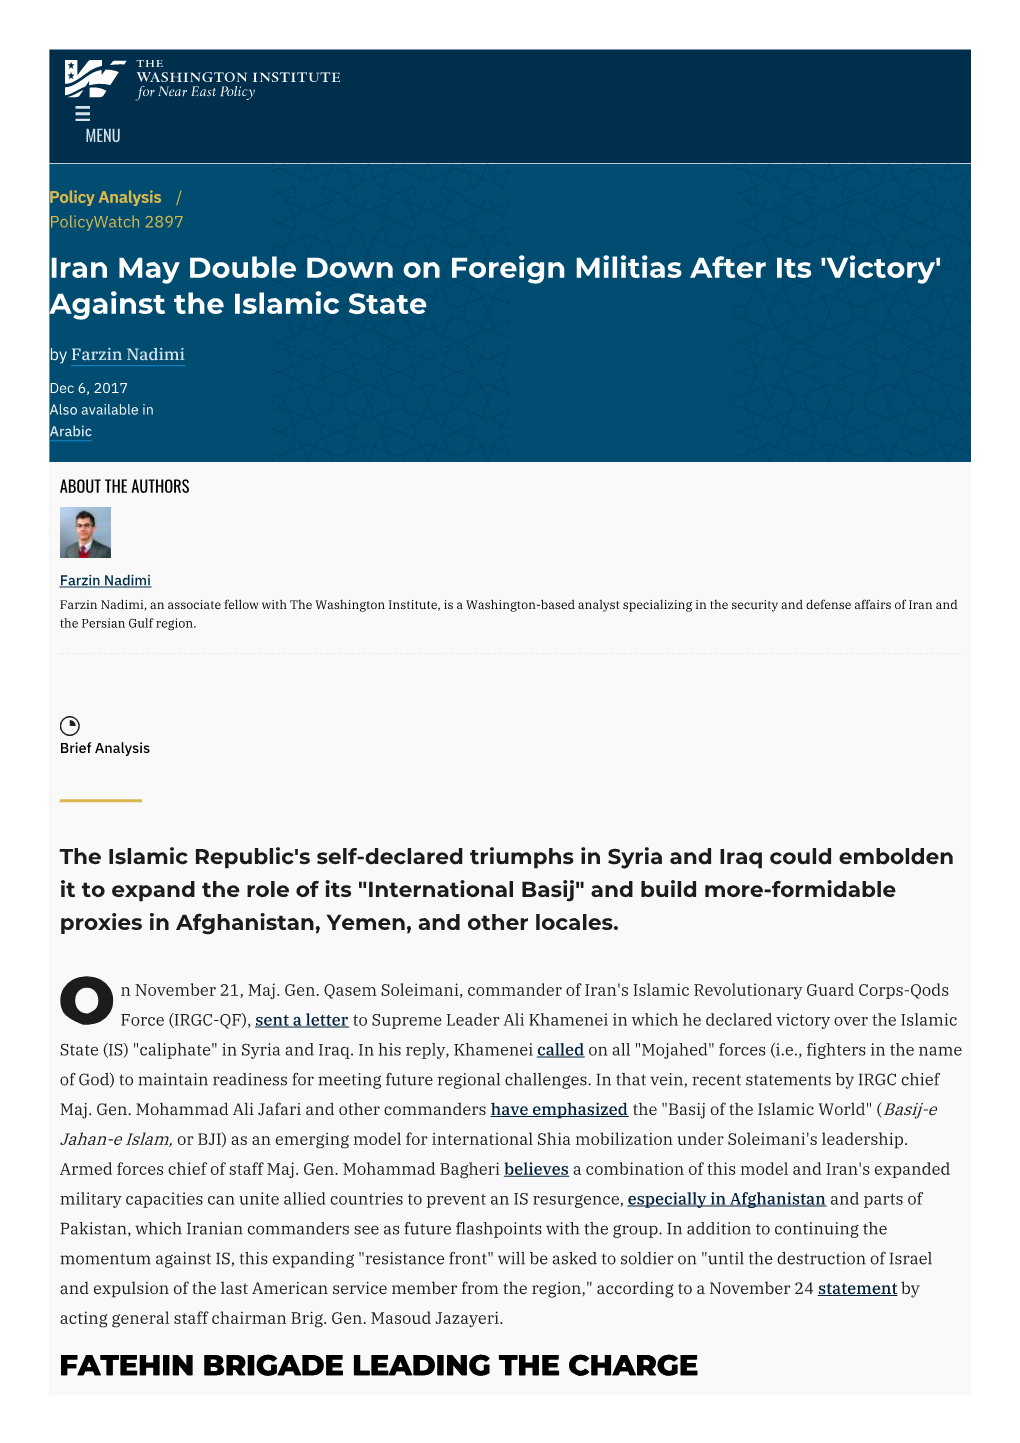 Iran May Double Down on Foreign Militias After Its 'Victory' Against the Islamic State by Farzin Nadimi